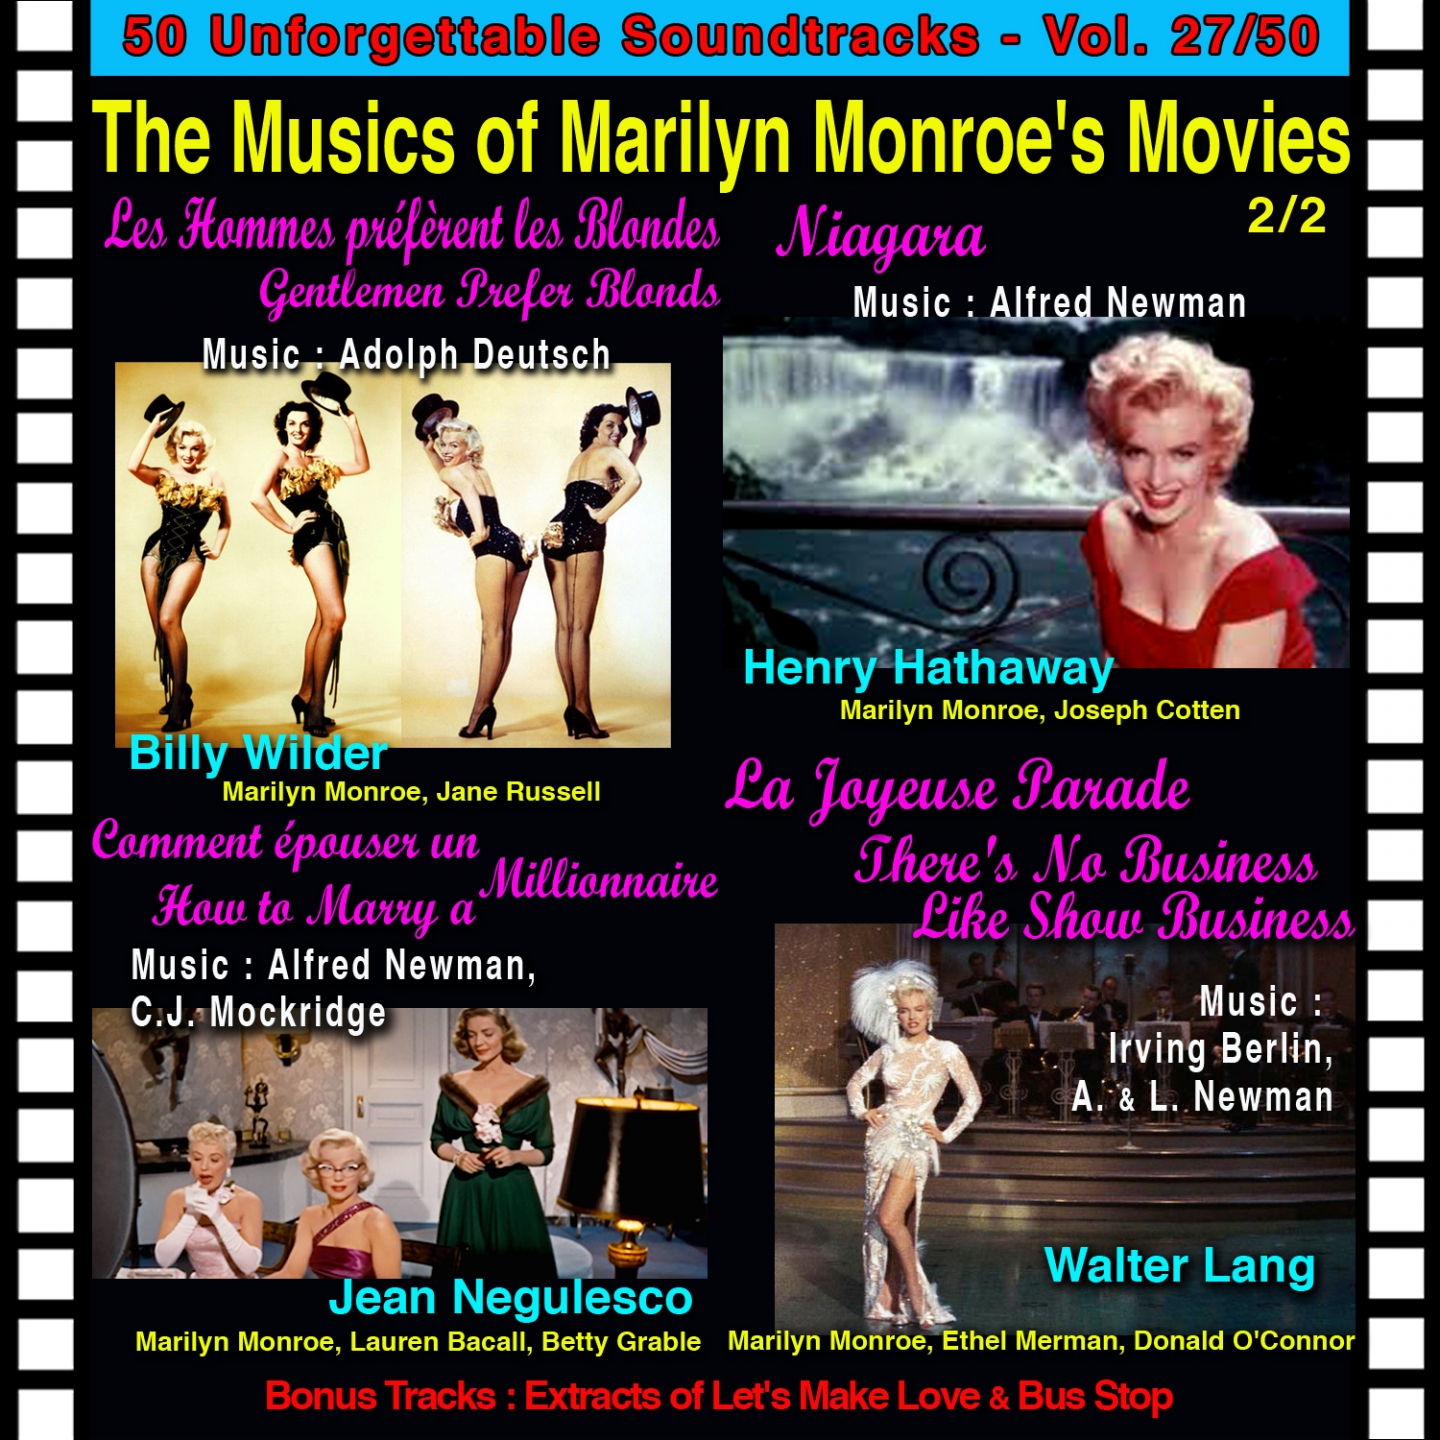 Les Hommes Pre fe rent Les Blondes  Gentlemen Prefer Blondes: Two Little Girls from Little Rock Marilyn Music Movies 2  2